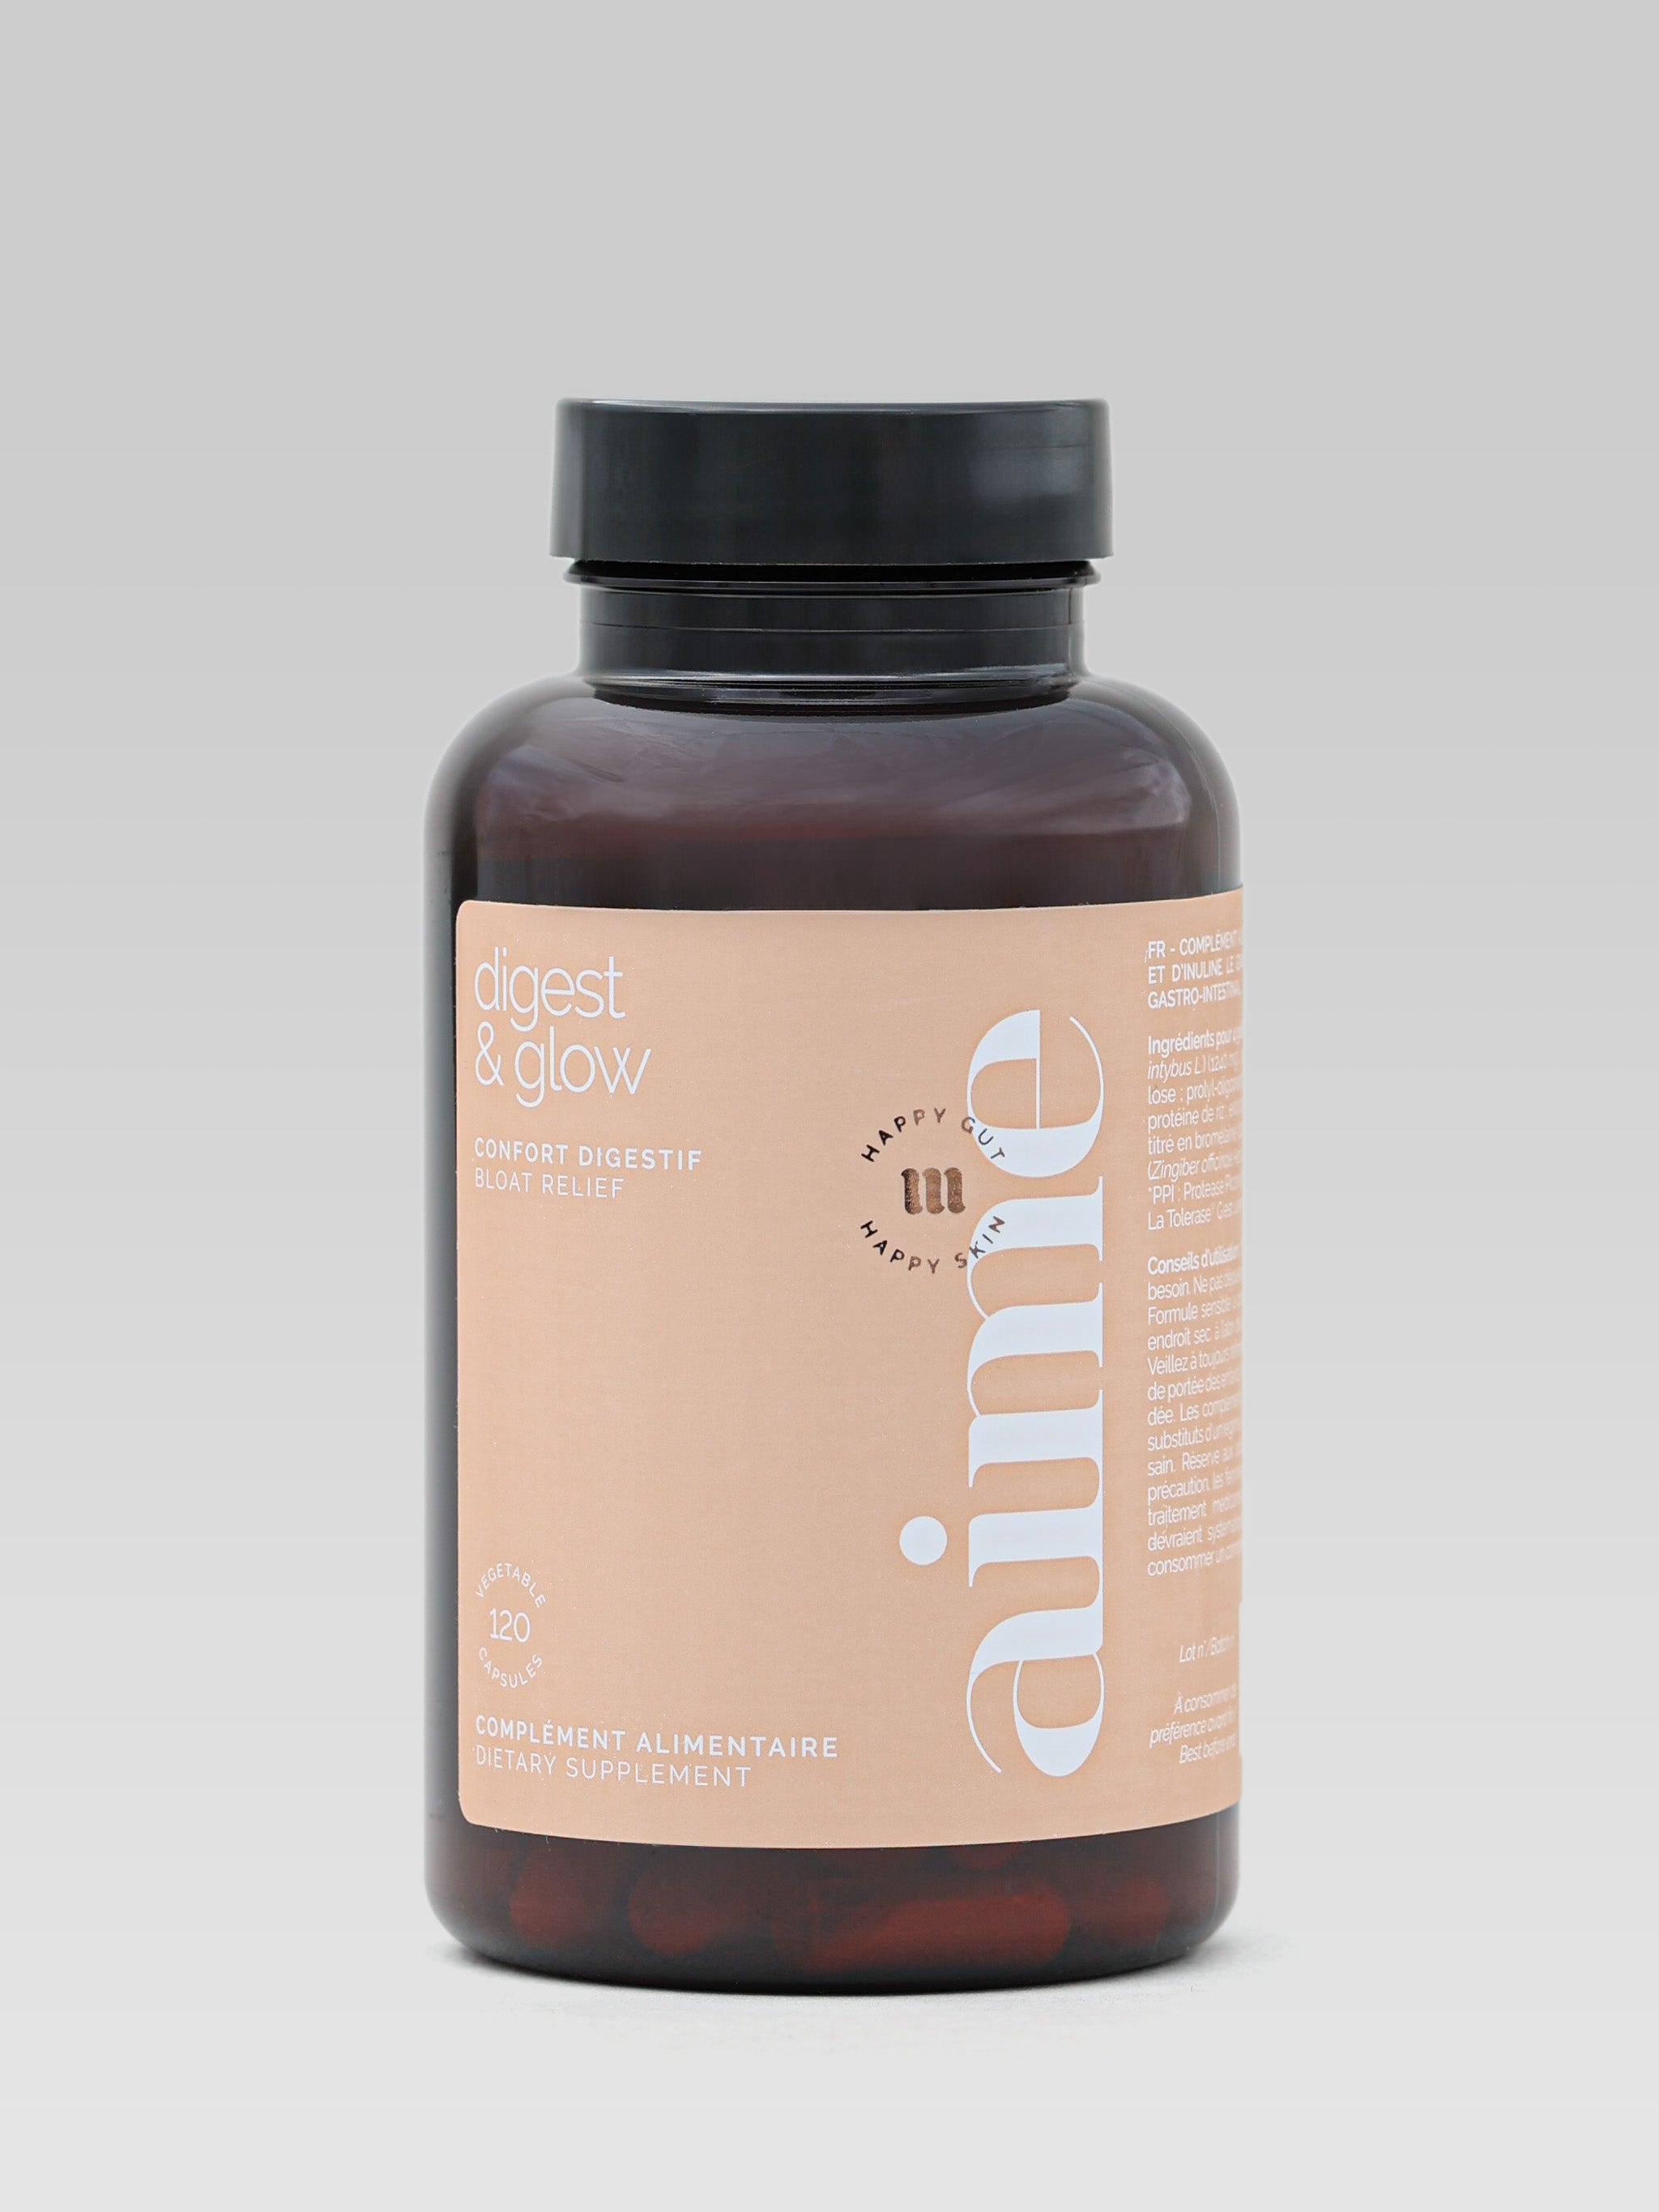 Aime digest and glow supplement product shot